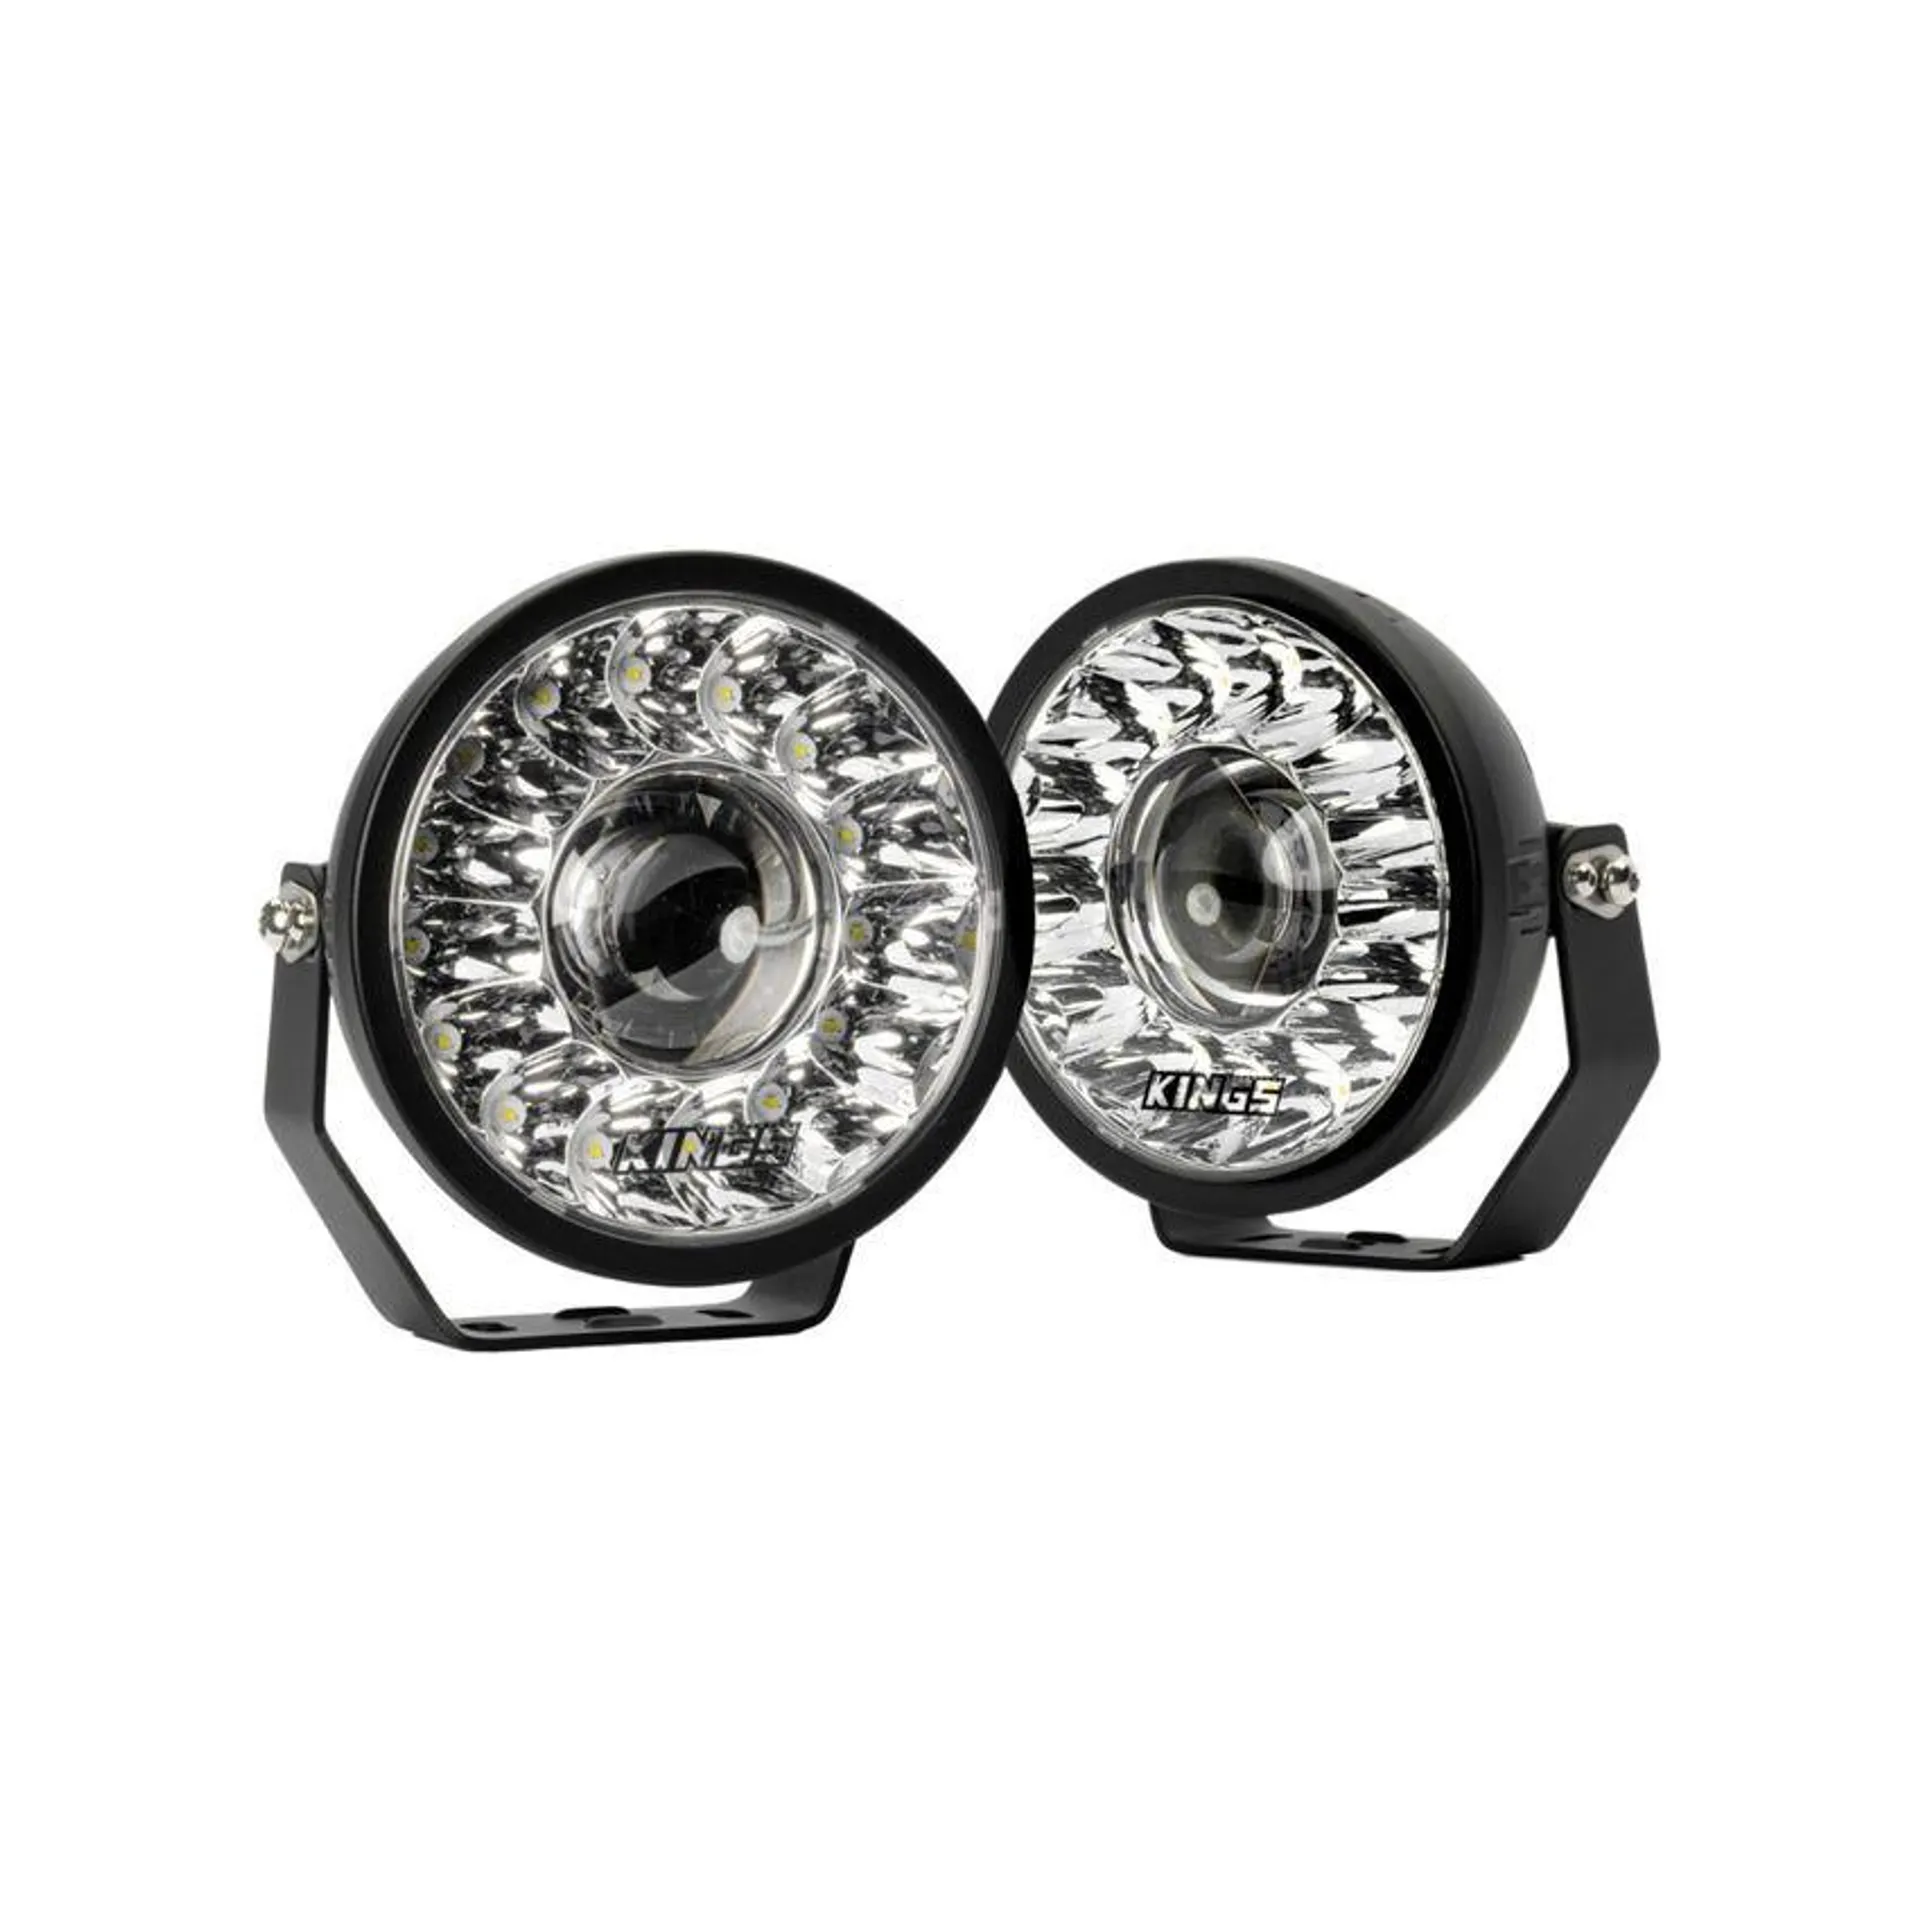 Kings 7” Illuminator Max LED Driving Lights (Pair) | Central LED module | Fitted with OSRAM LEDs | 10,096 Lumens | 1 Lux @ 1,129m